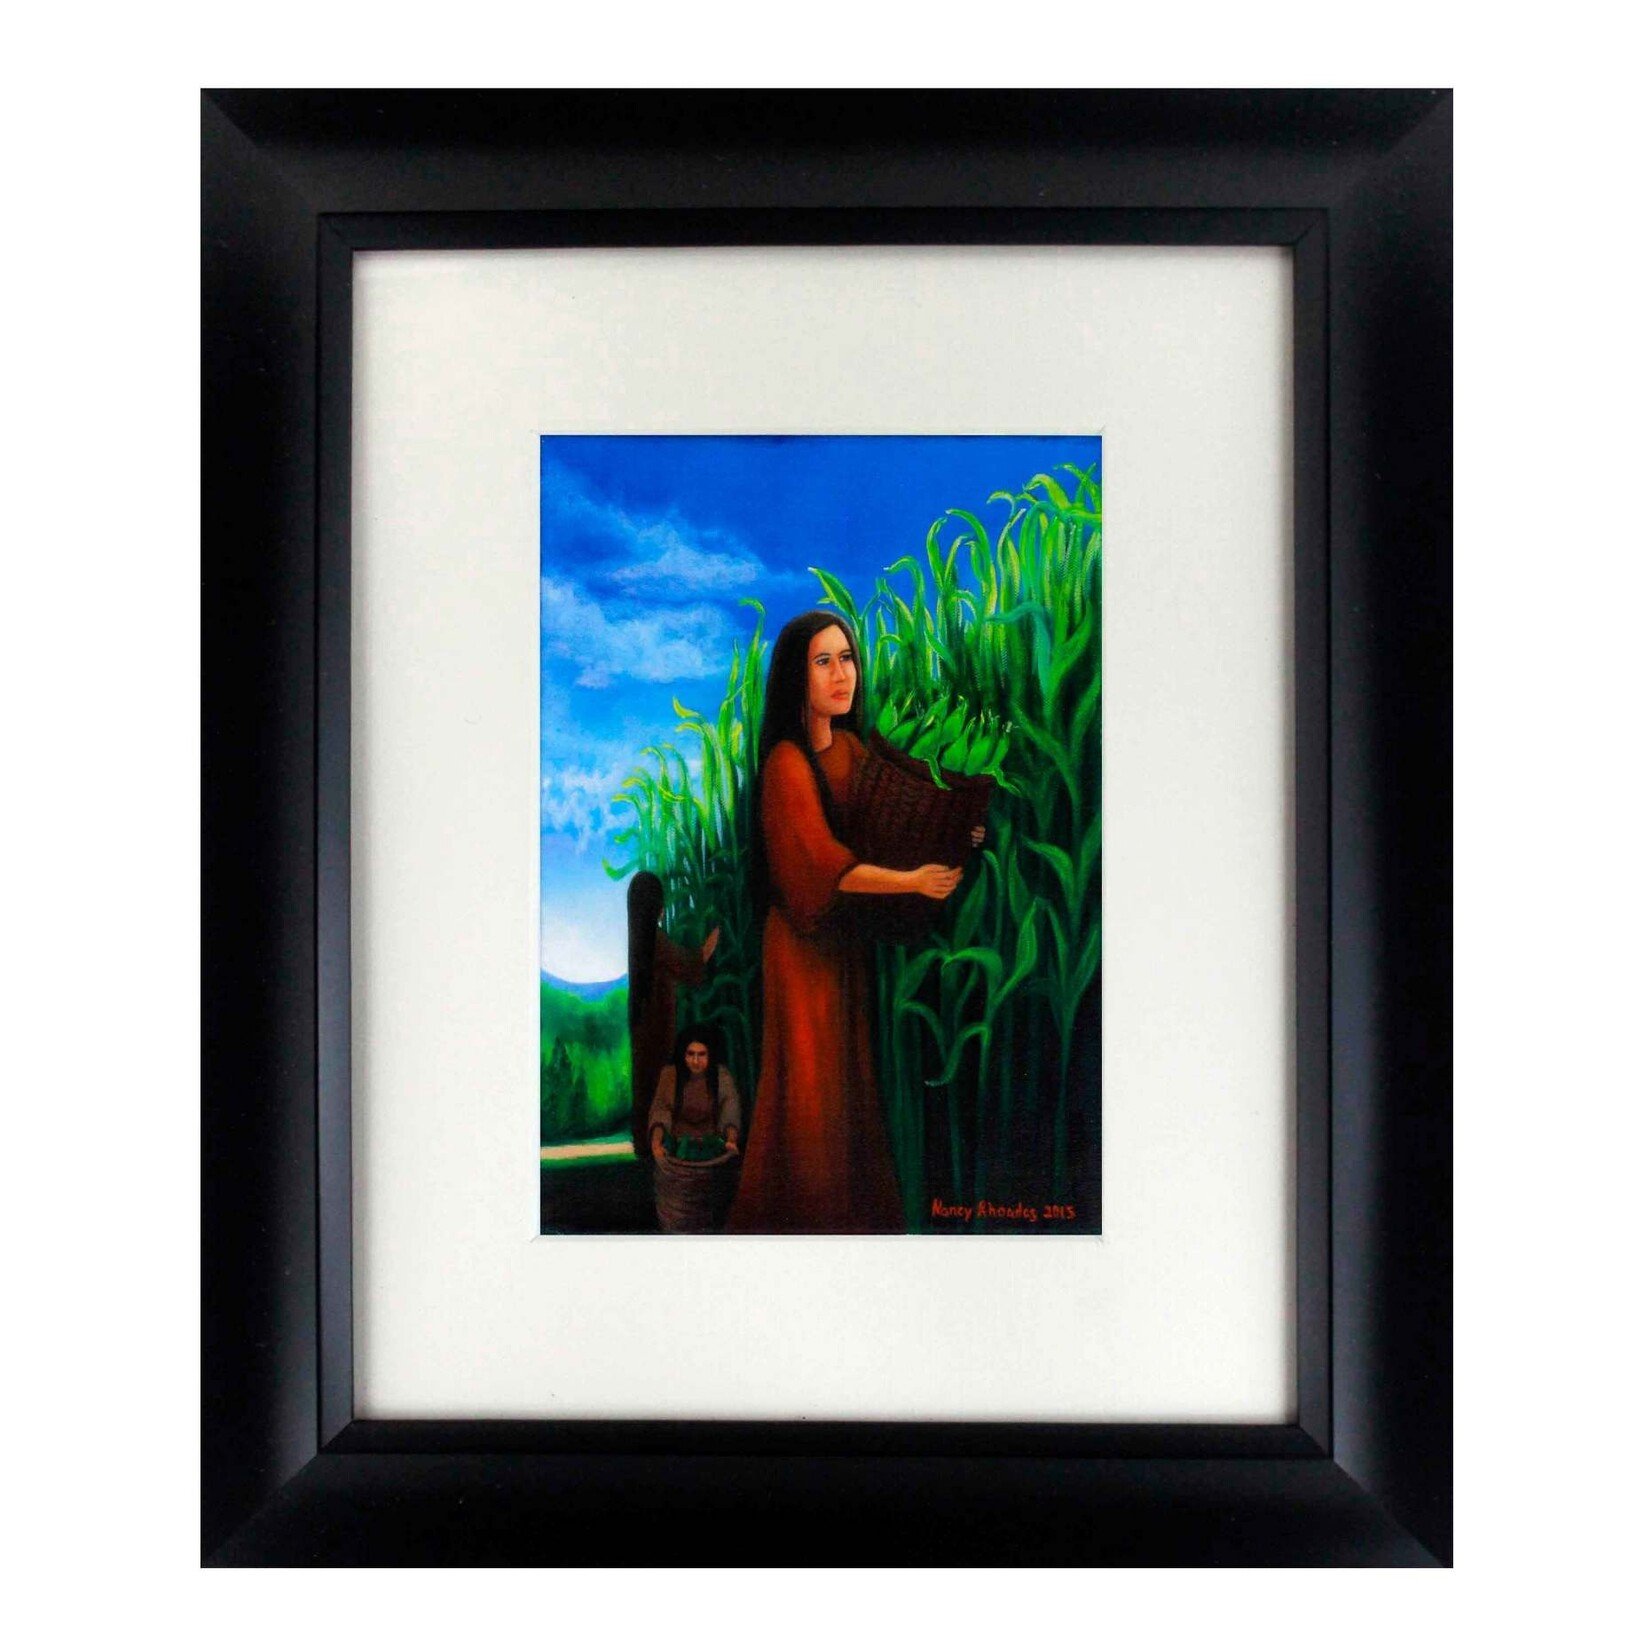 *NR "Early Morning Pick" 8 X 10 Matted Framed Print